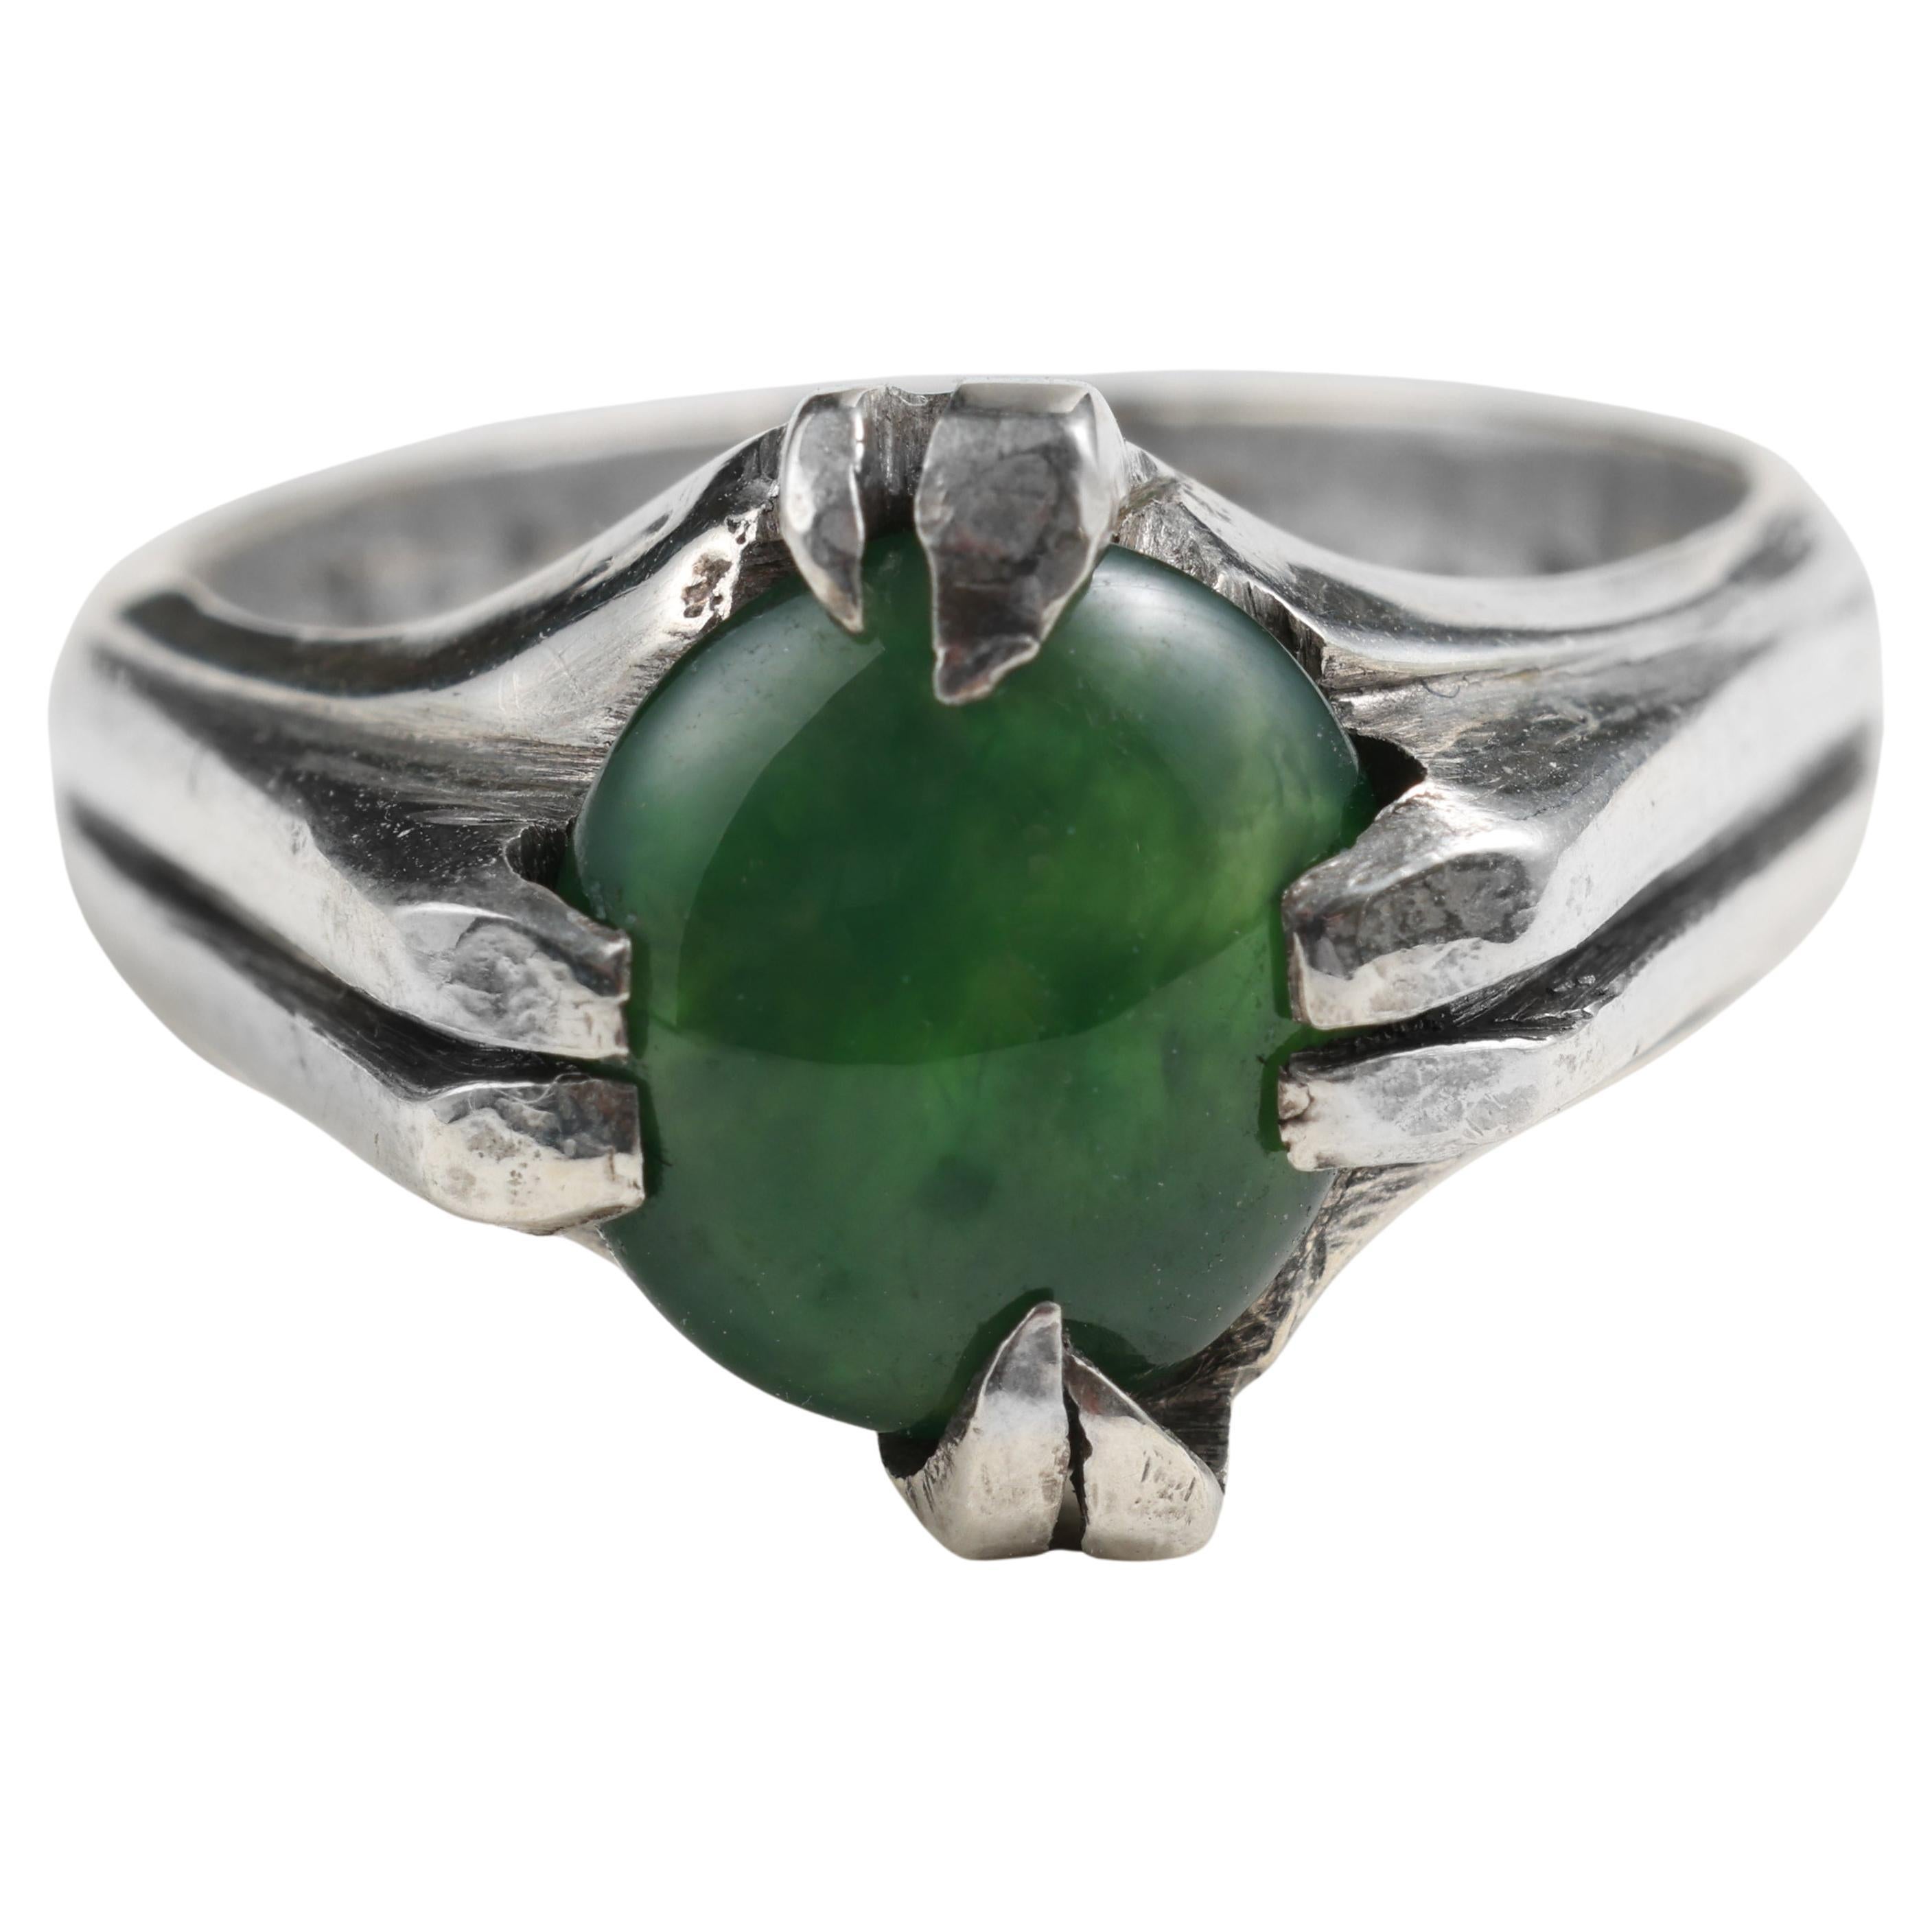 Omphacite Jade Ring in Silver, Certified Untreated Fei Cui